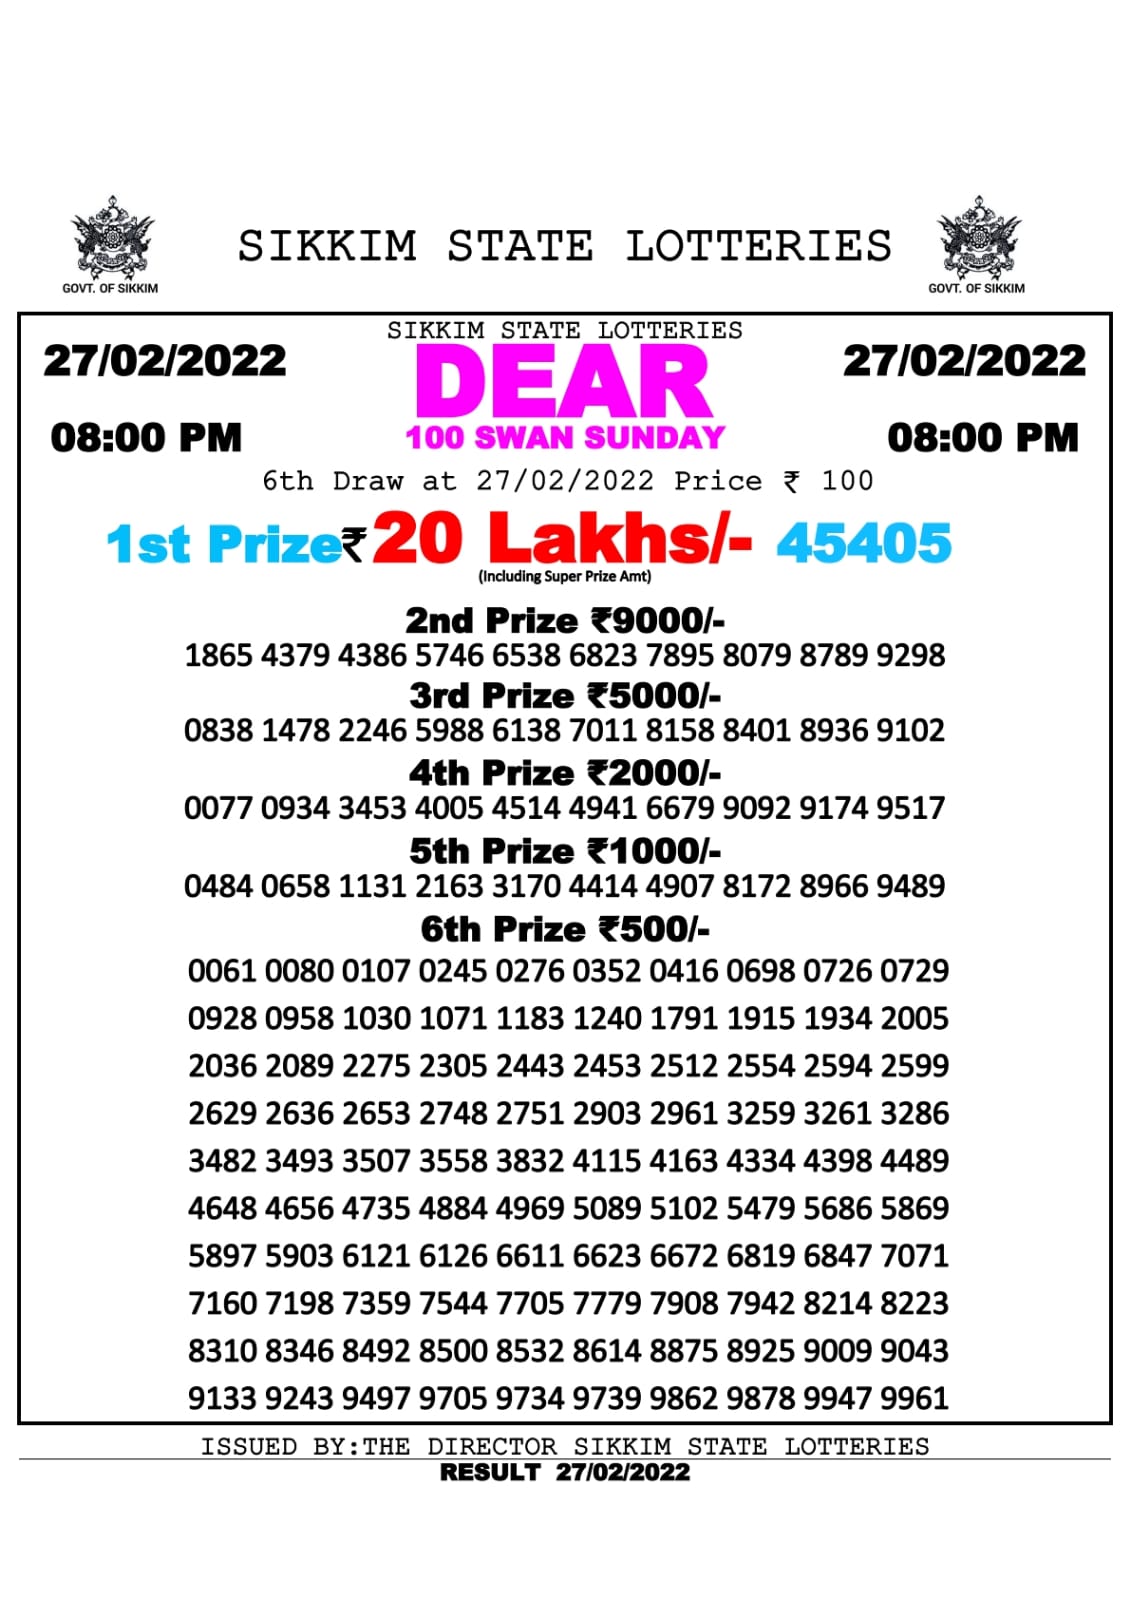 DEAR 100 WEEKLY RESULT 8.00PM 27.02.2022